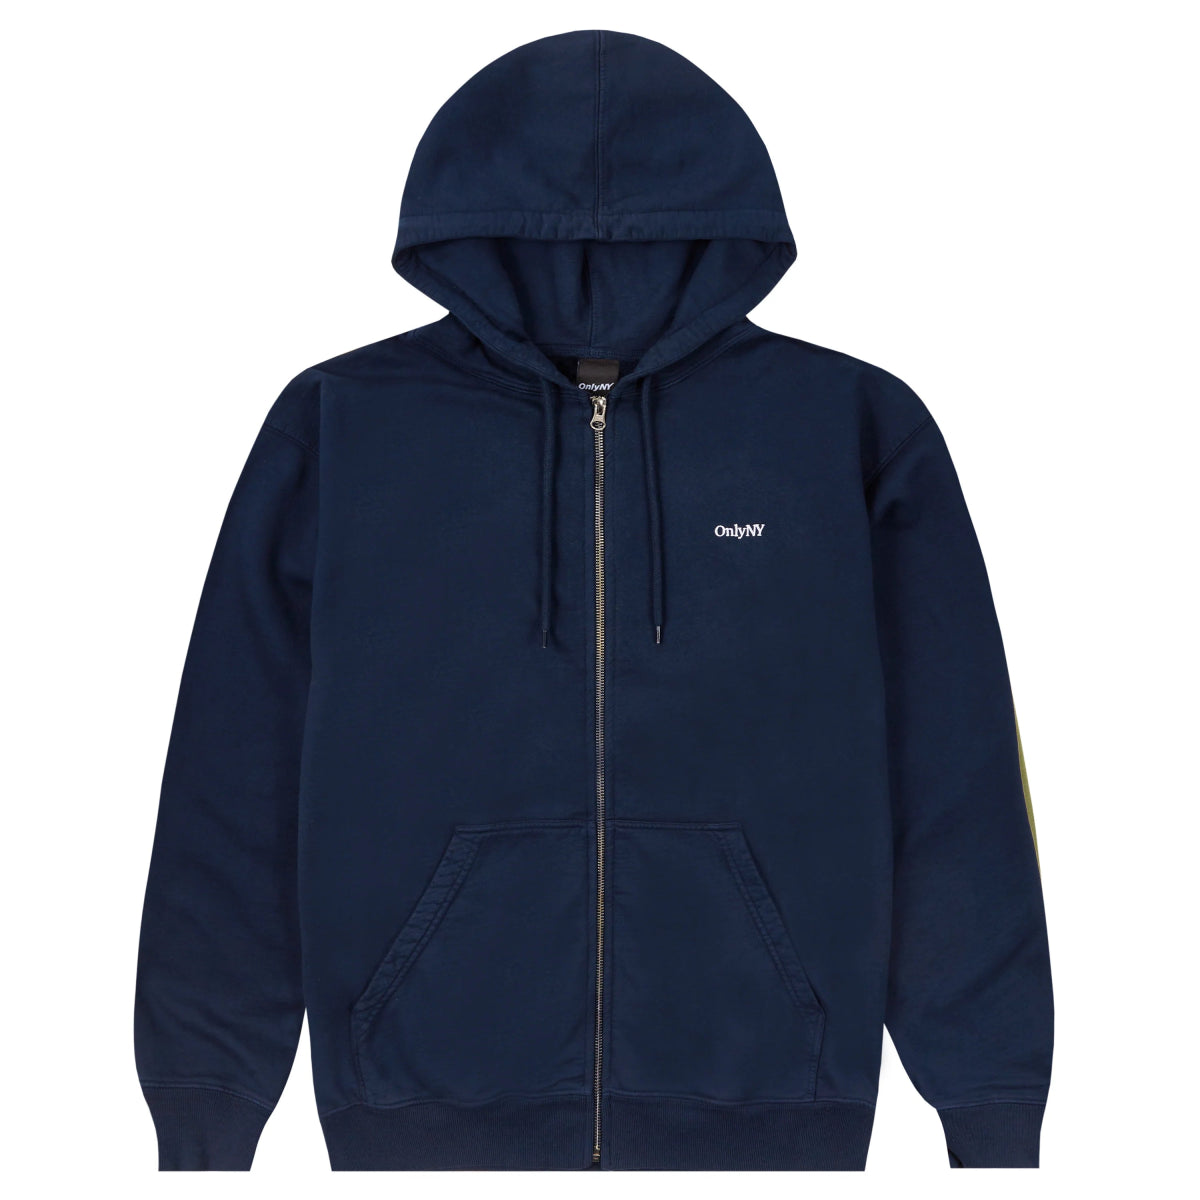 Only NY New York Harvest Zip Hoodie Navy - 3012628 - West NYC